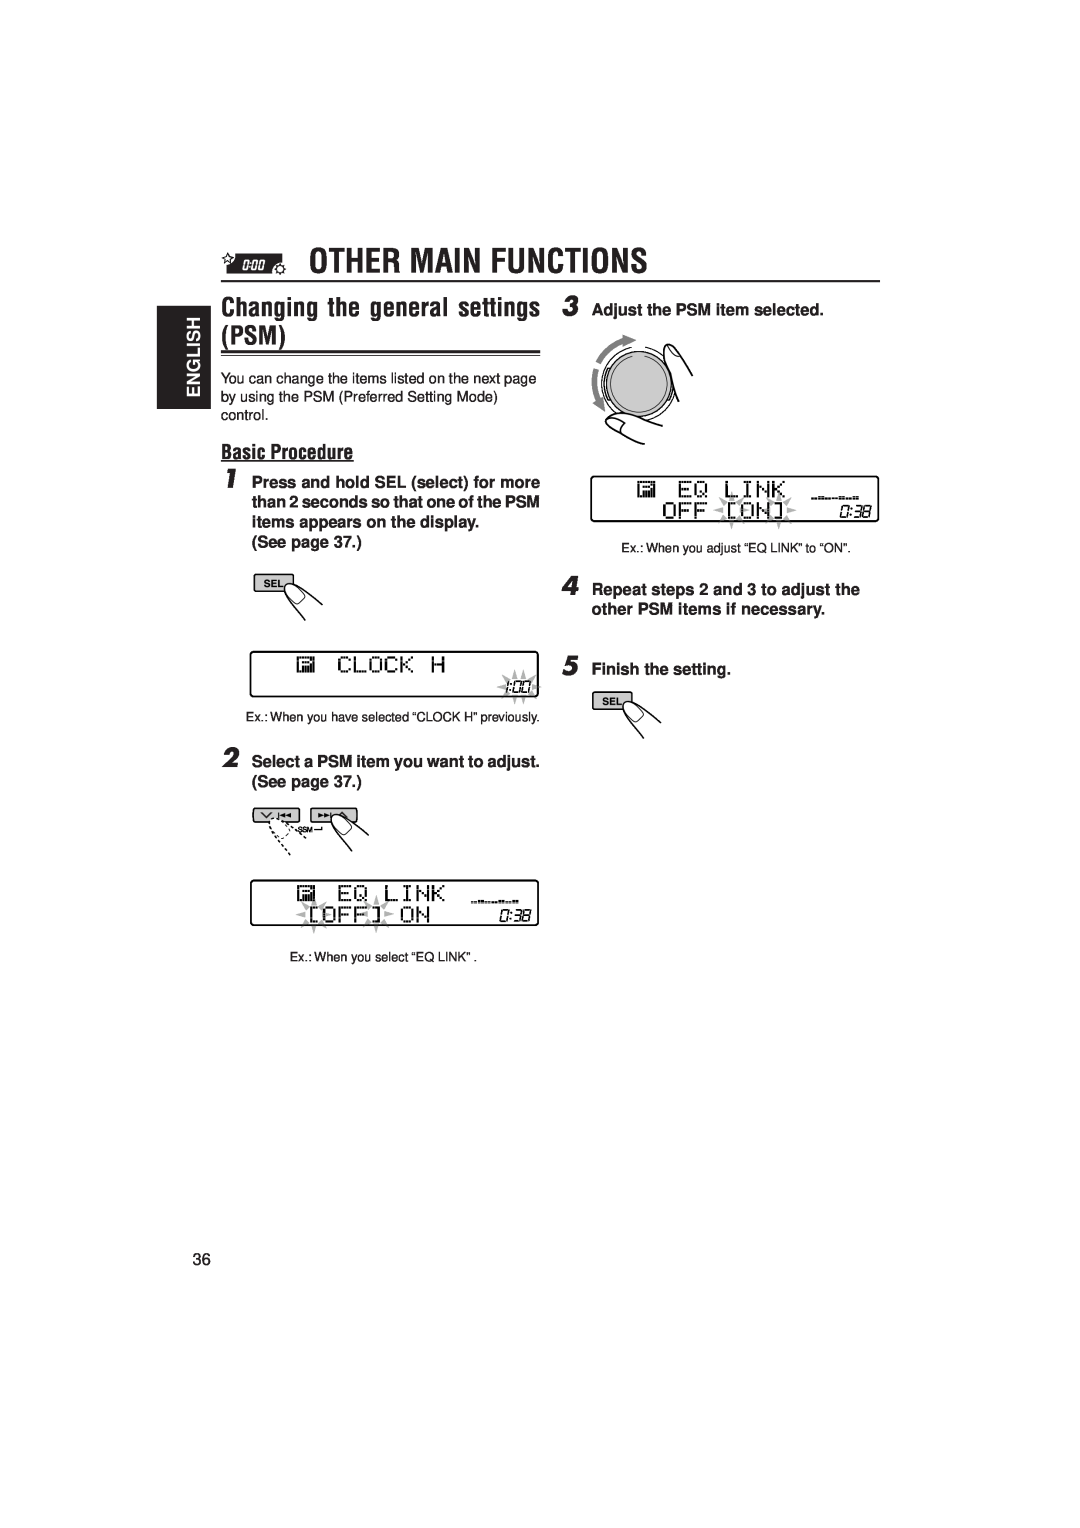 JVC KD-SH909R, KD-SH707R manual Other Main Functions, Basic Procedure, English, See page, Finish the setting 